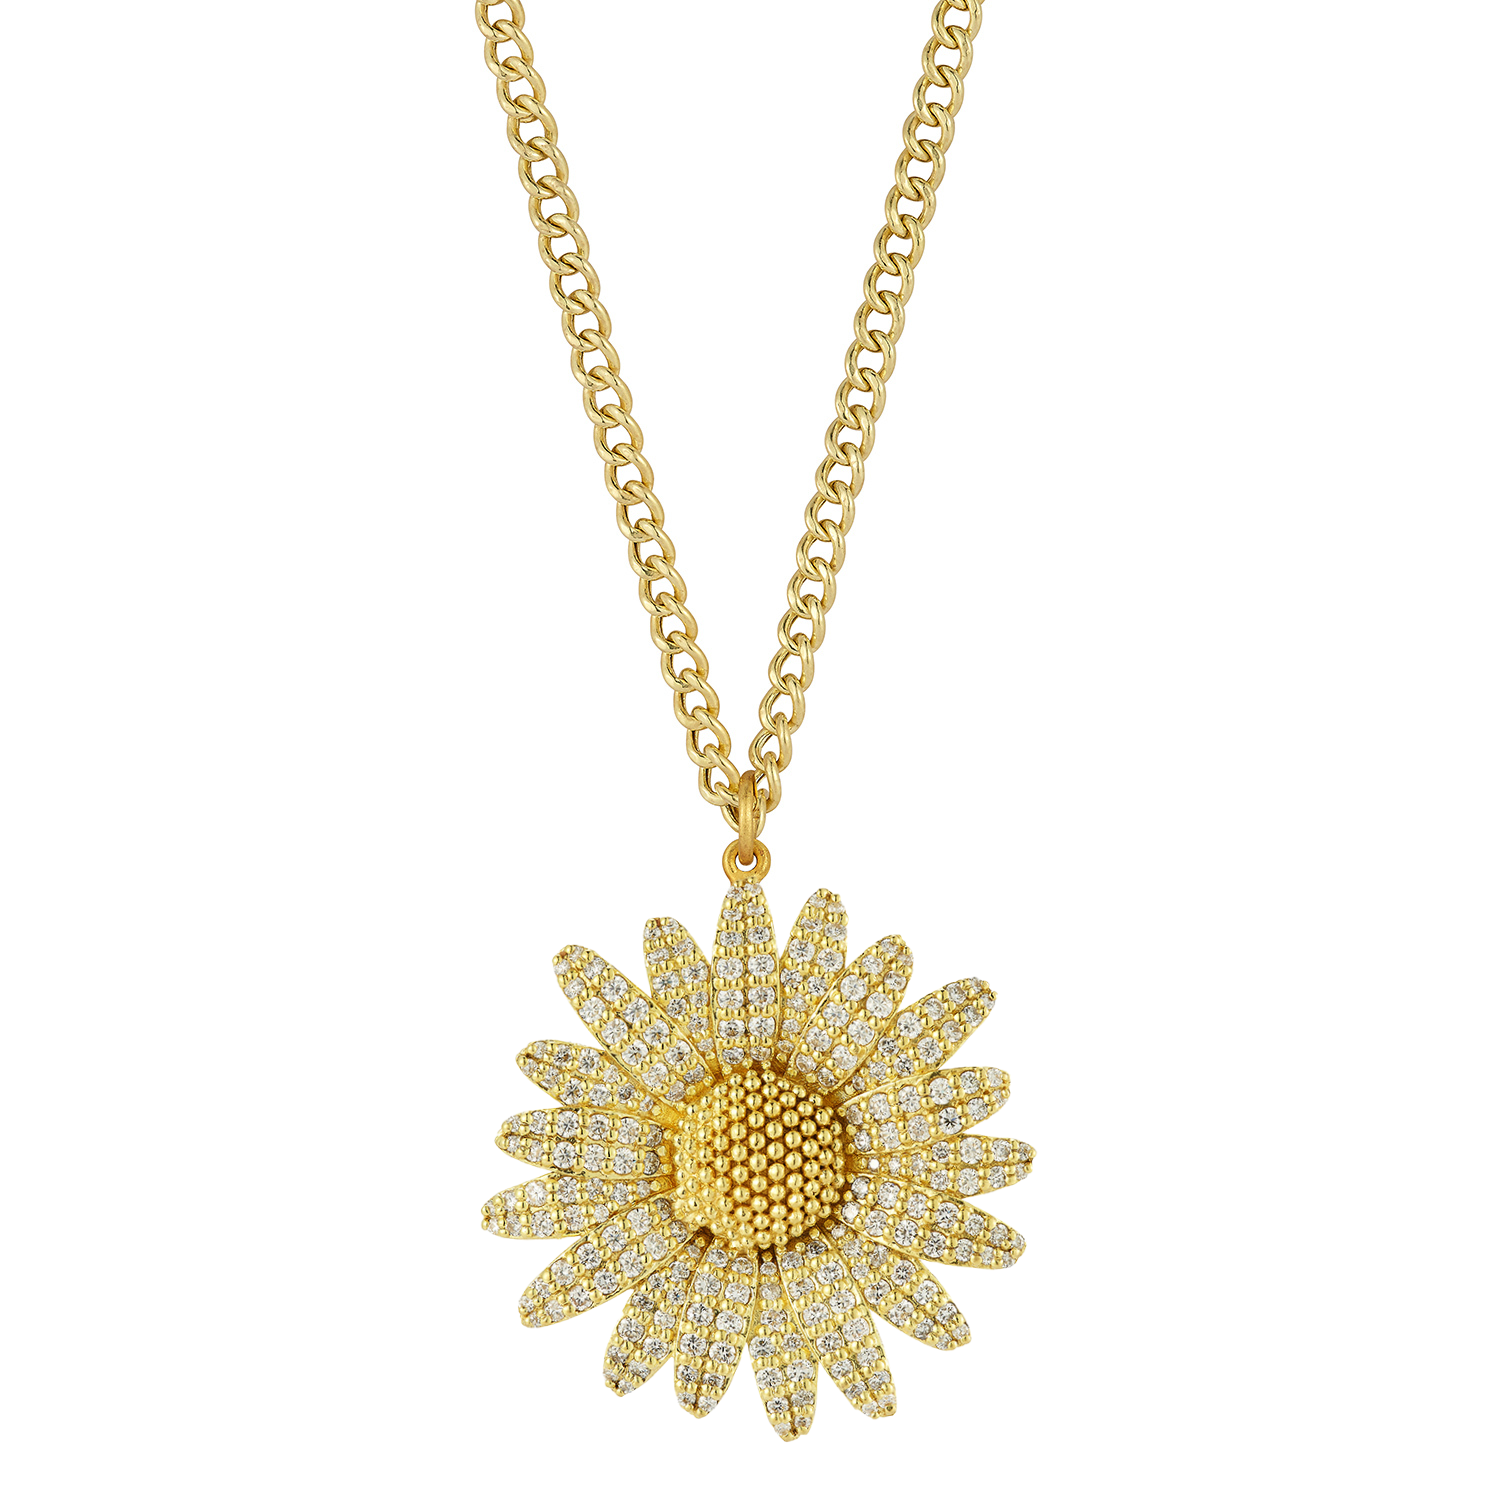 Large Daisy Necklace with Diamonds